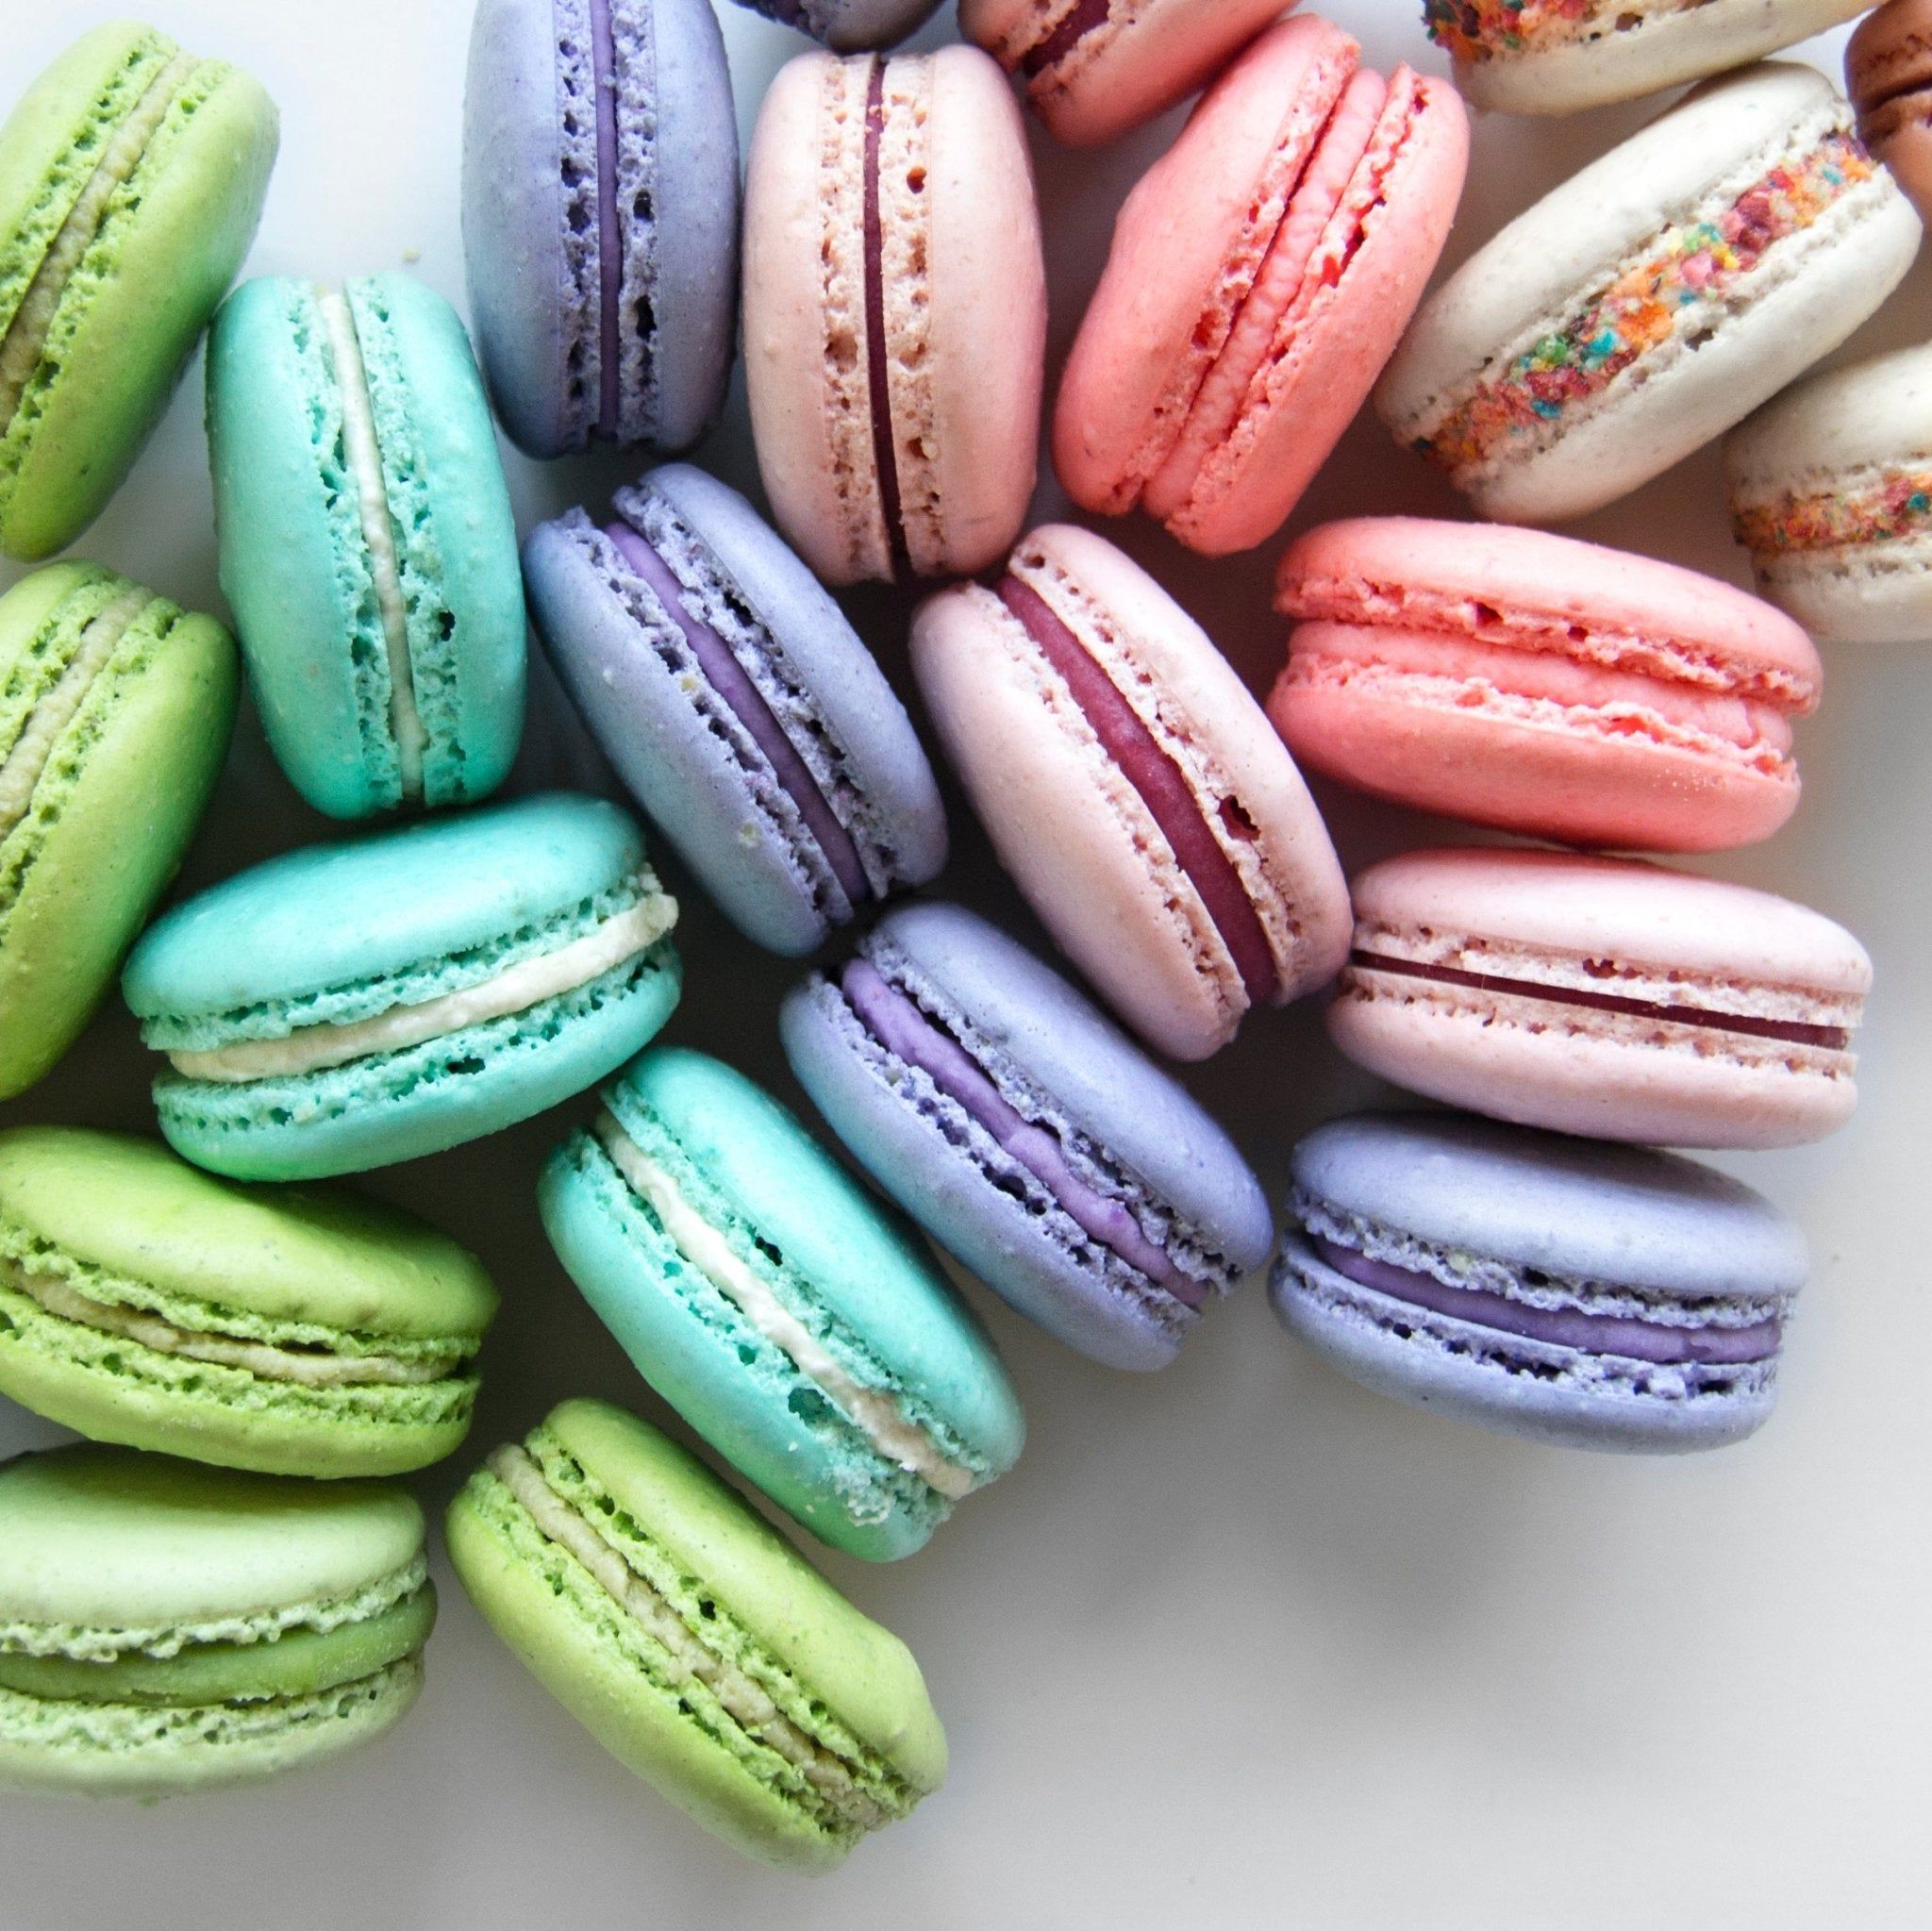 Sharing Our Passion for Macarons